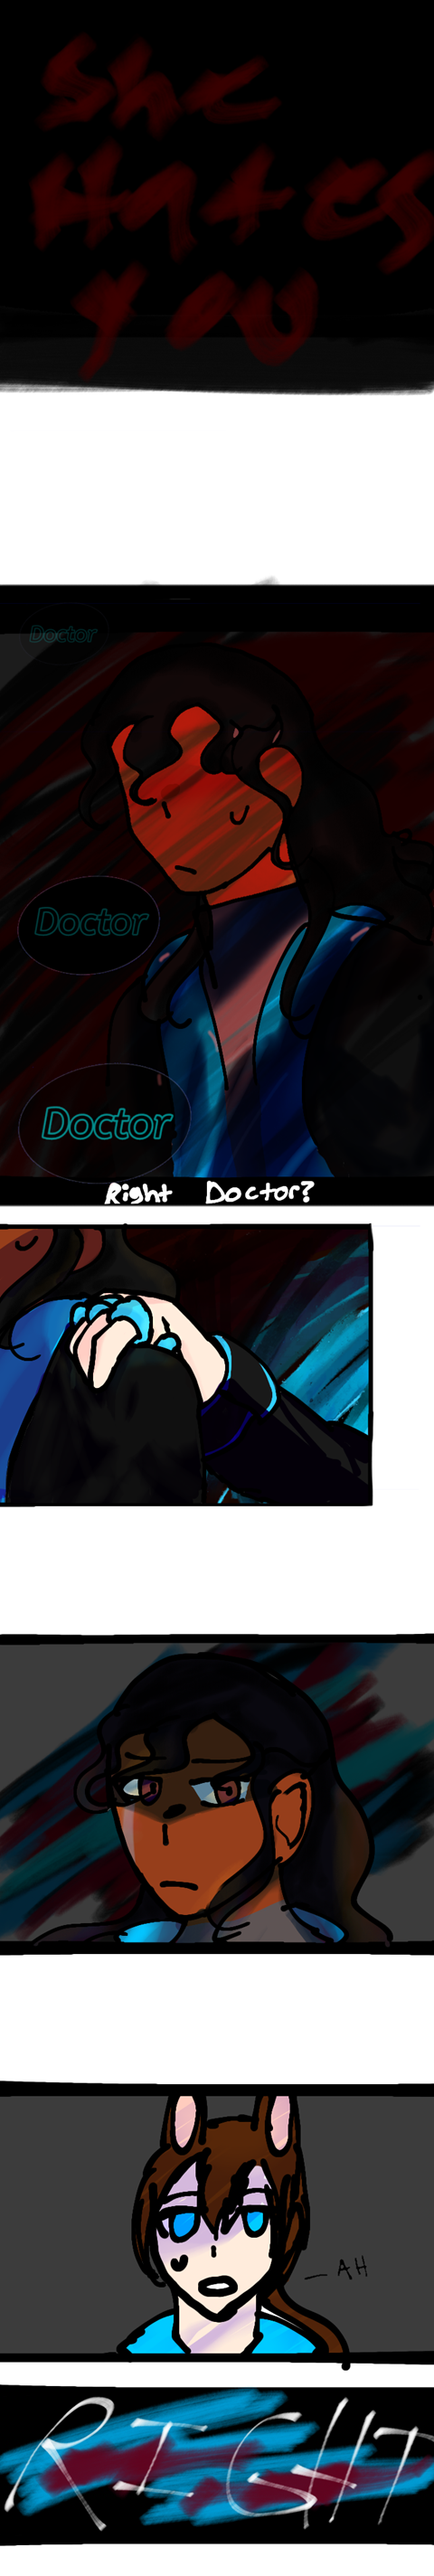 Short Arknights angst comic of my Doctor